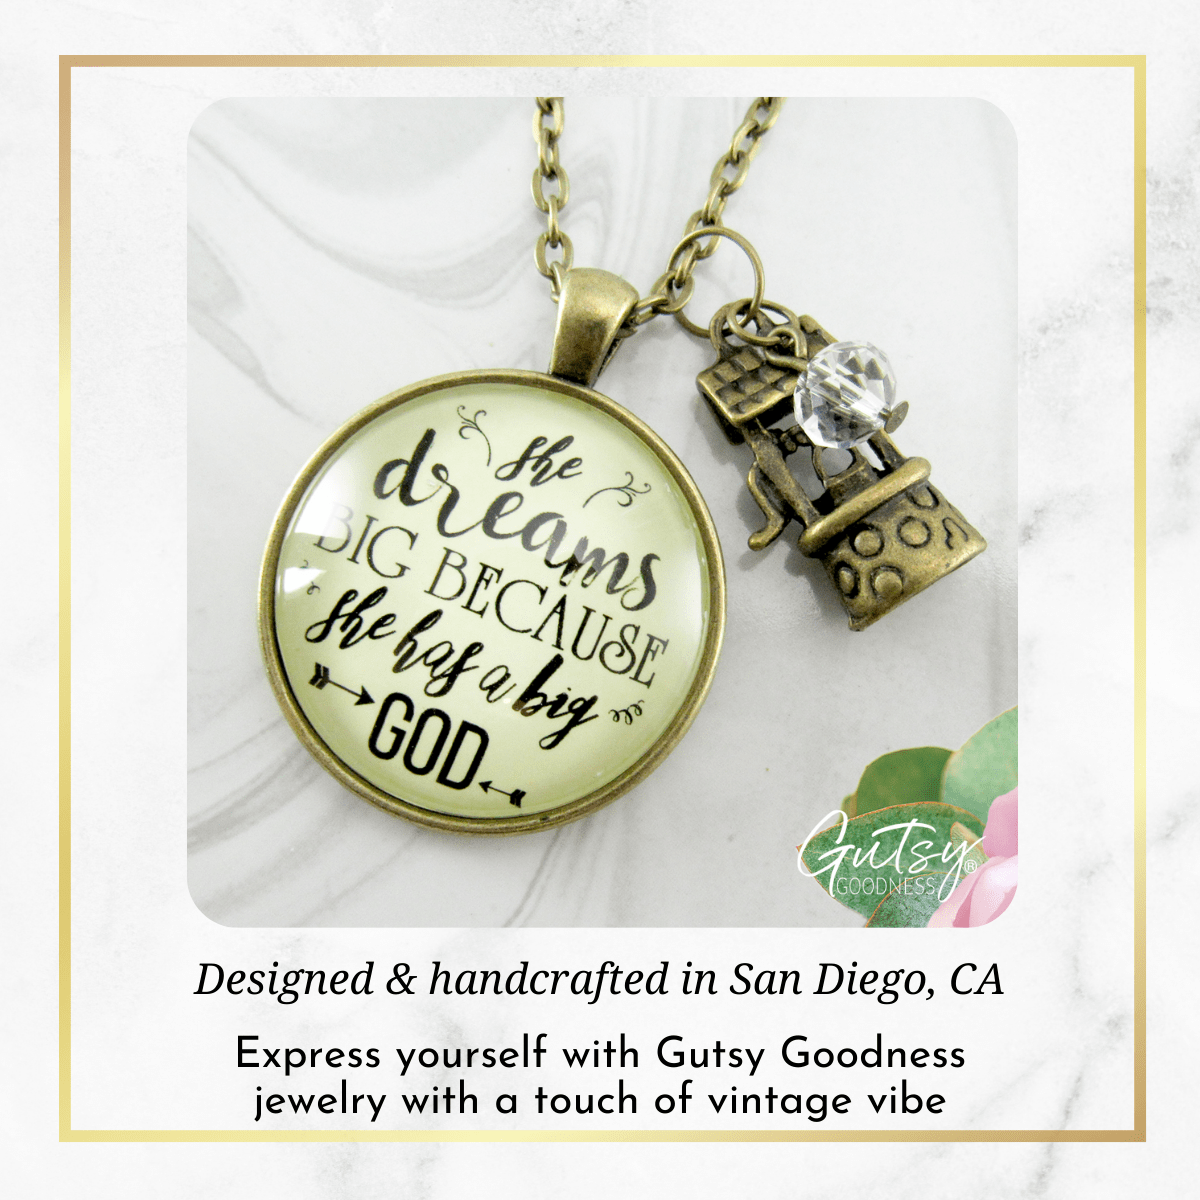 Gutsy Goodness Dreamer Necklace She Dreams Big God Faith Inspired Women Jewelry - Gutsy Goodness;Dreamer Necklace She Dreams Big God Faith Inspired Women Jewelry - Gutsy Goodness Handmade Jewelry Gifts